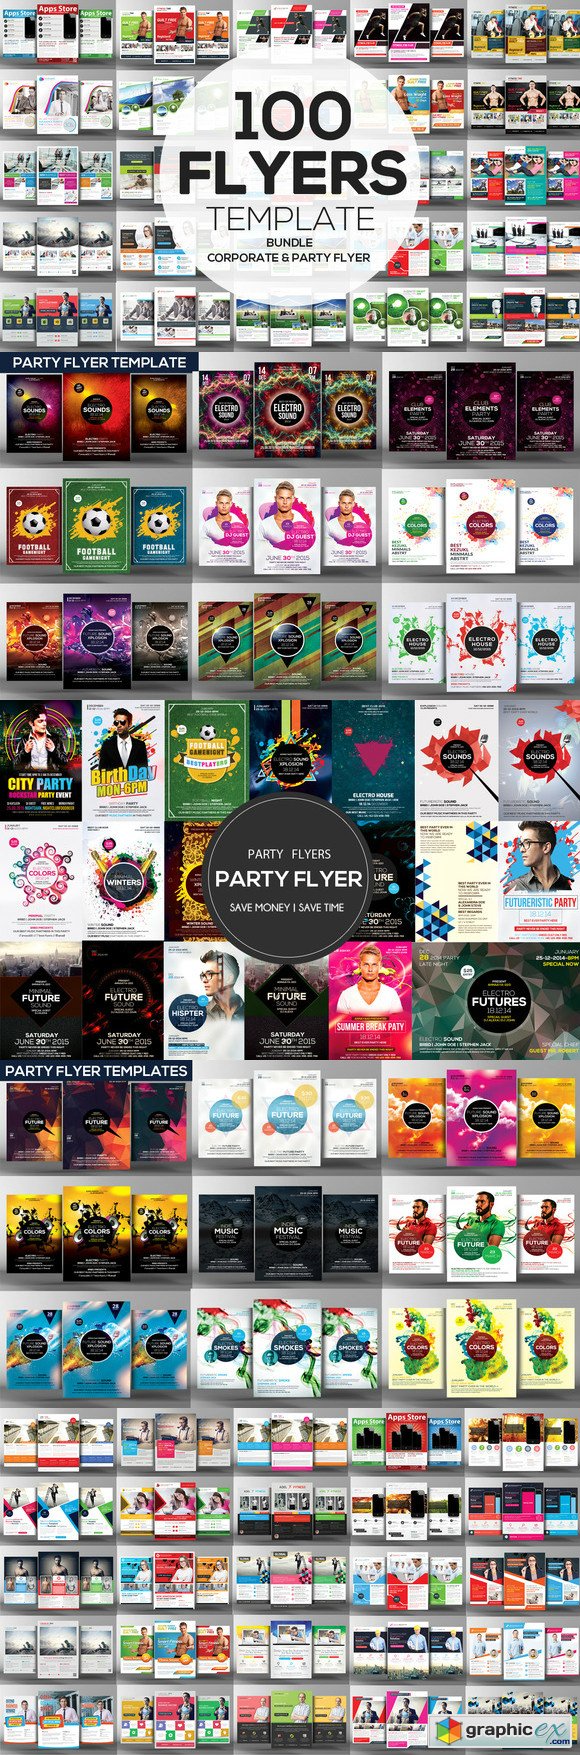 100 Corporate and Party Flyers Psd